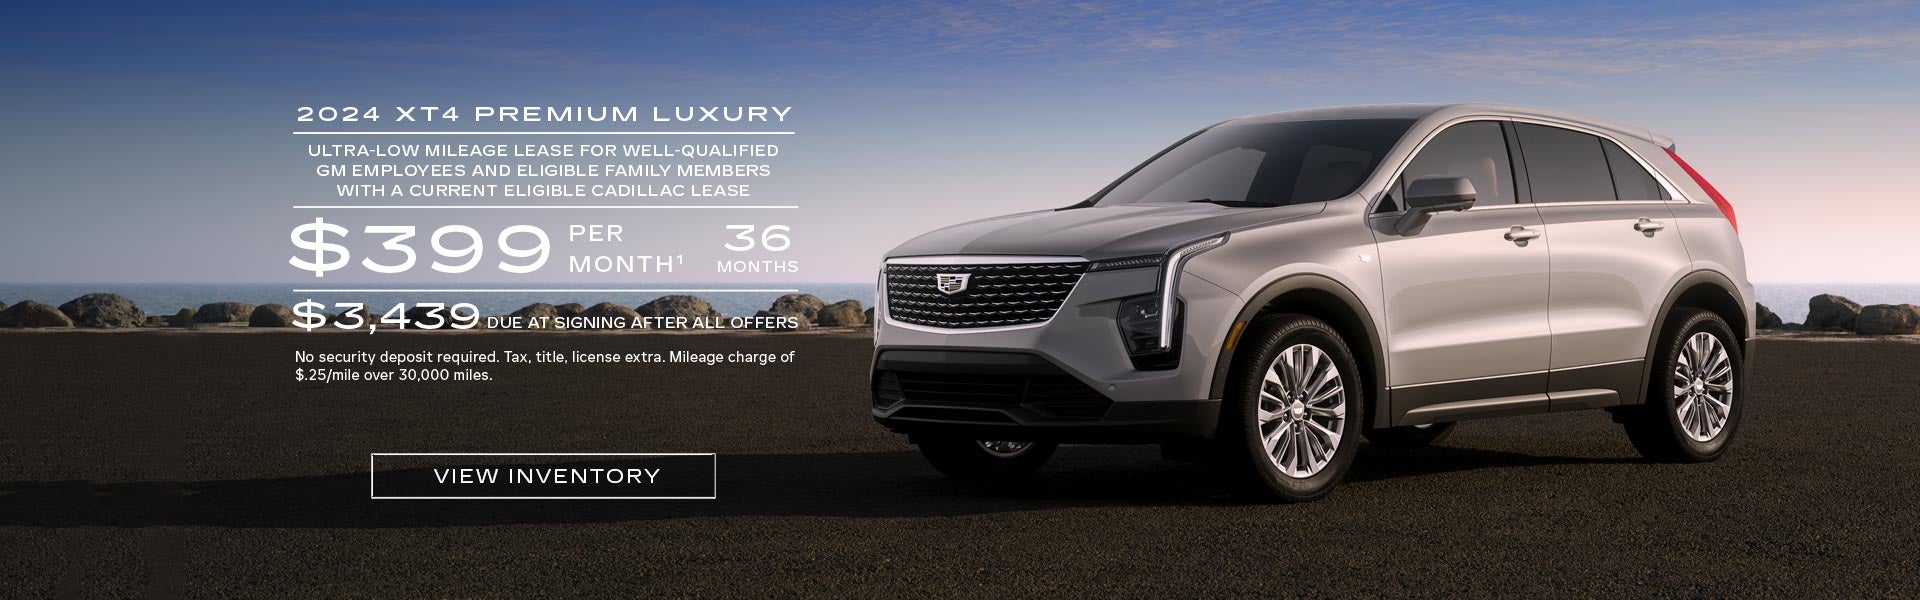 2024 XT4 Premium Luxury. Ultra-low mileage lease for well-qualified current eligible GM employees...